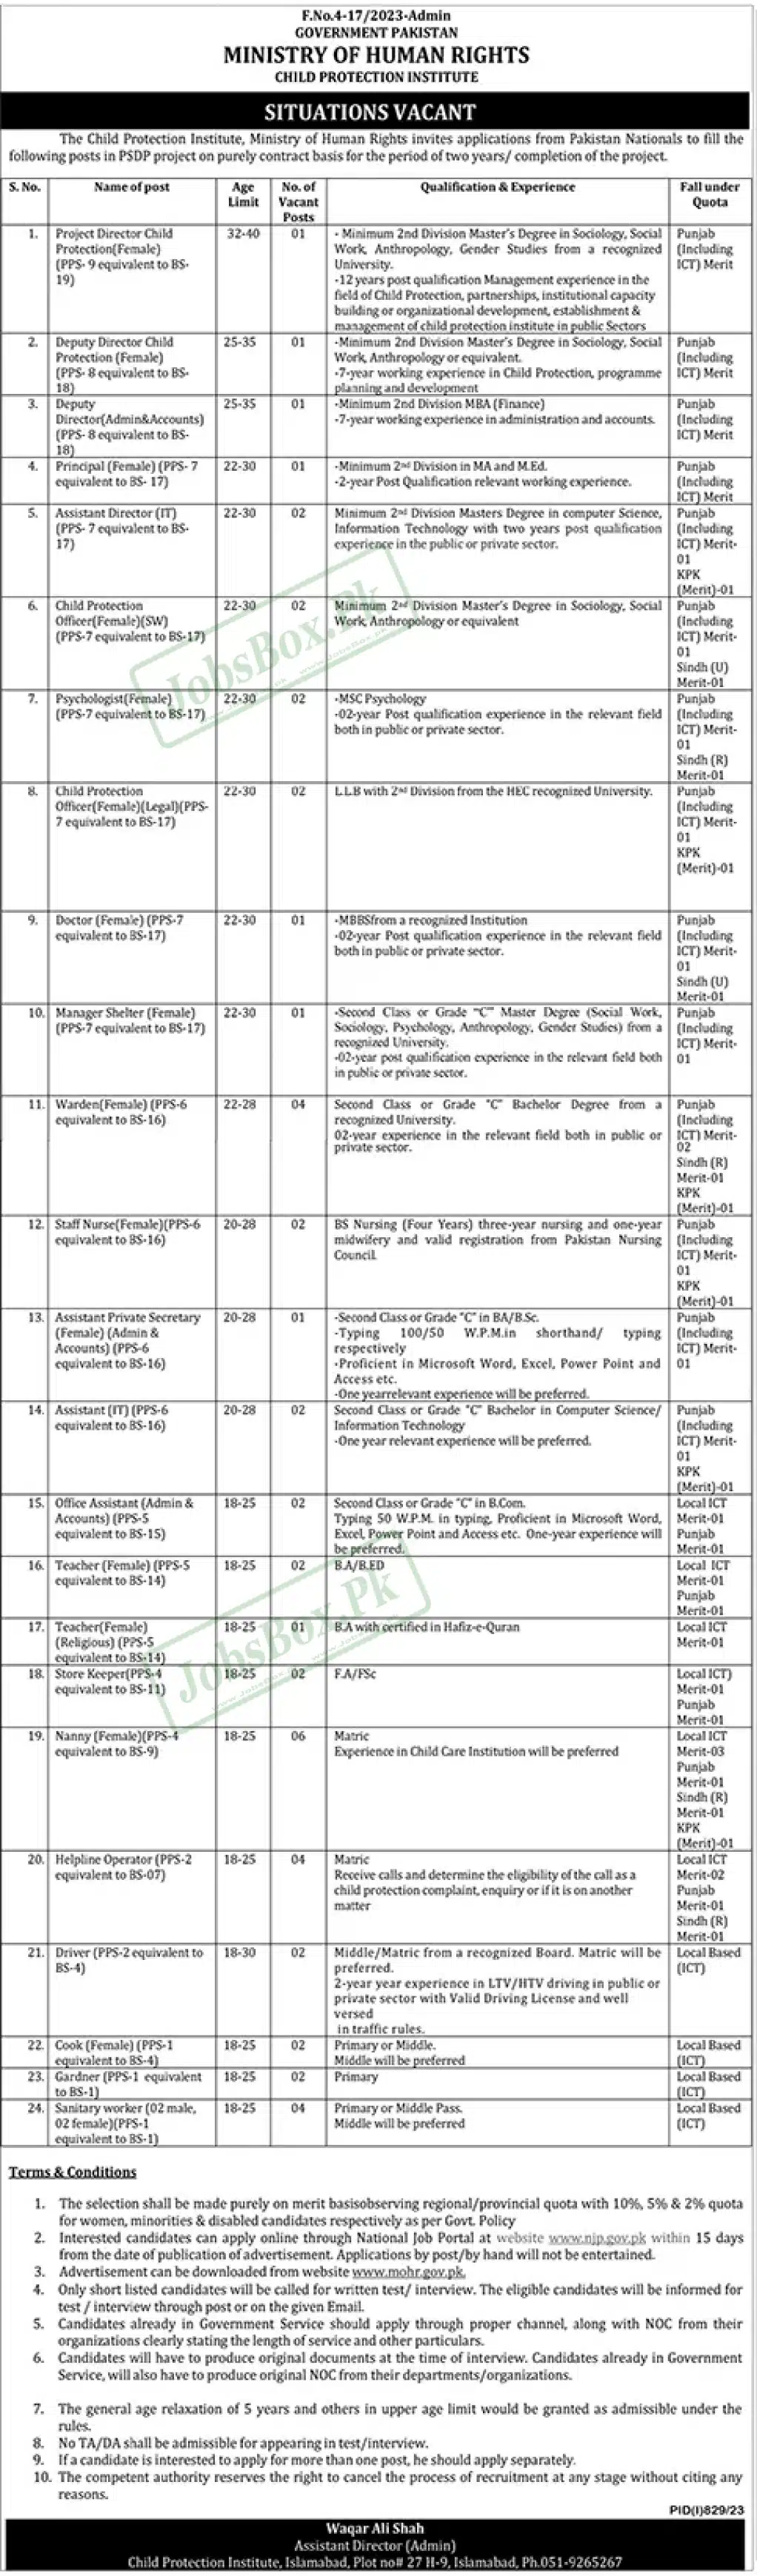 Human Rights Ministry MOHR Jobs 2023 Current Opportunities